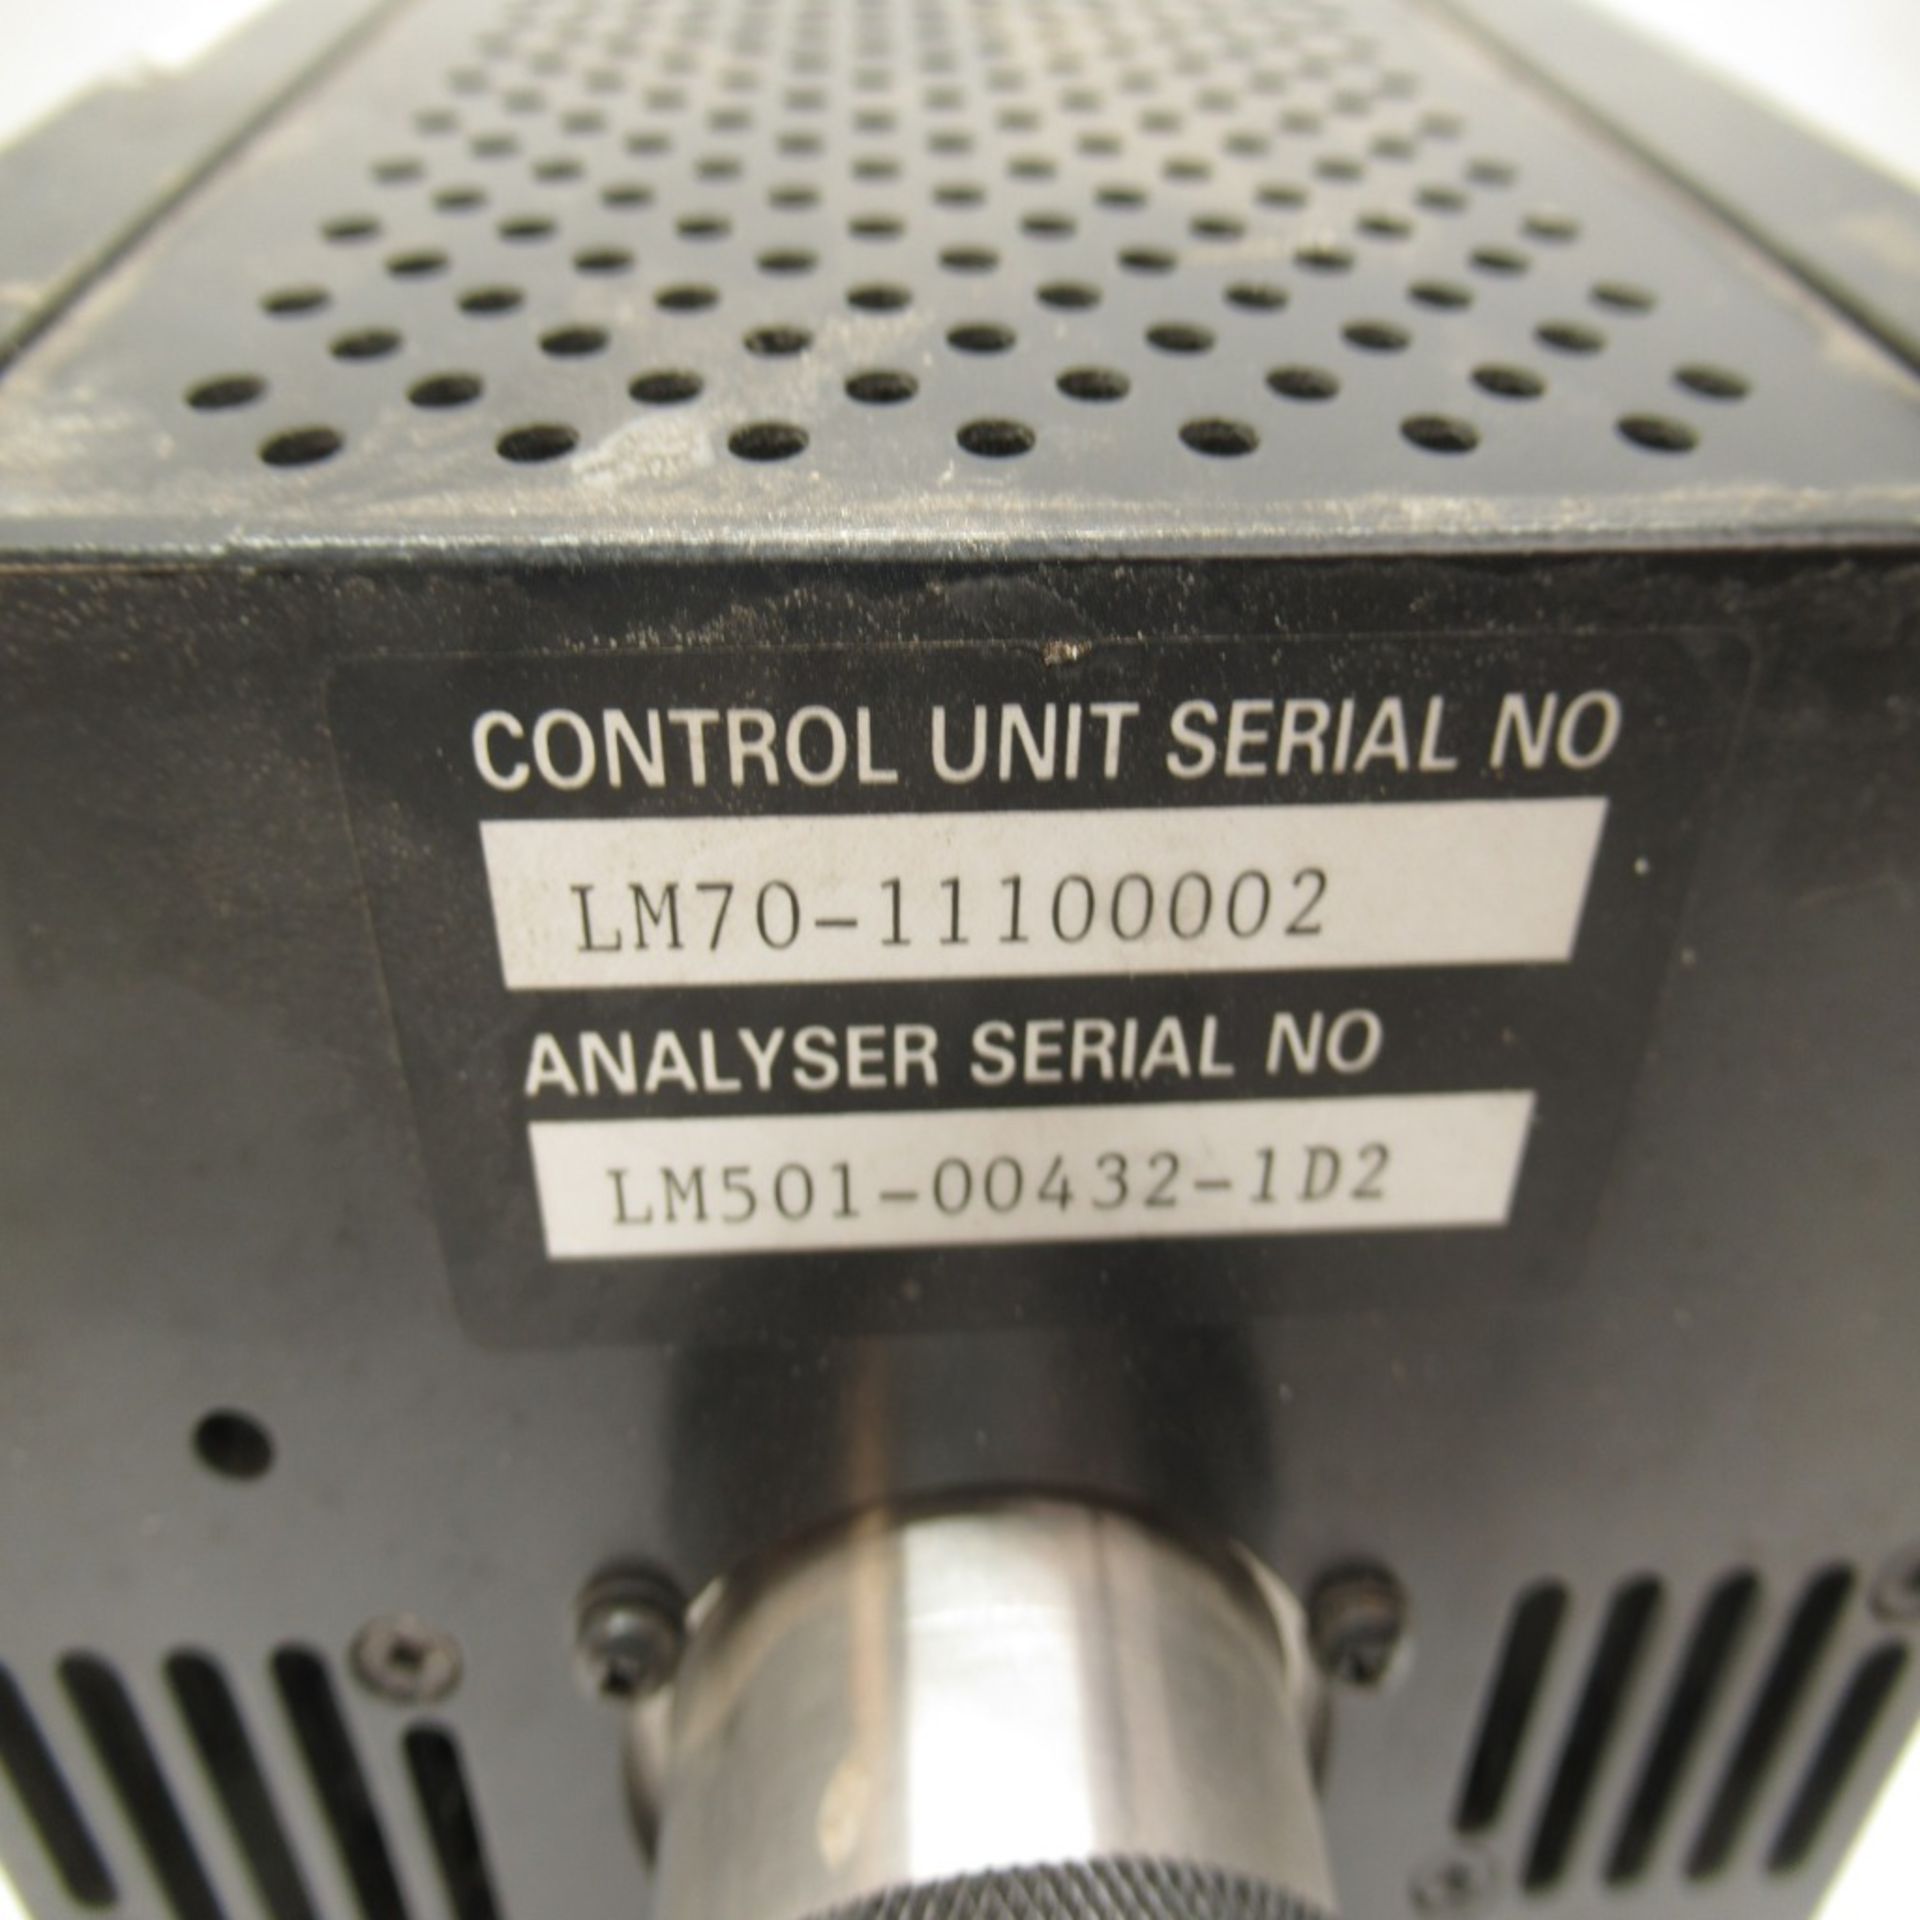 SPECTRA MICROVISION PLUS CONTROL UNIT - Image 5 of 8